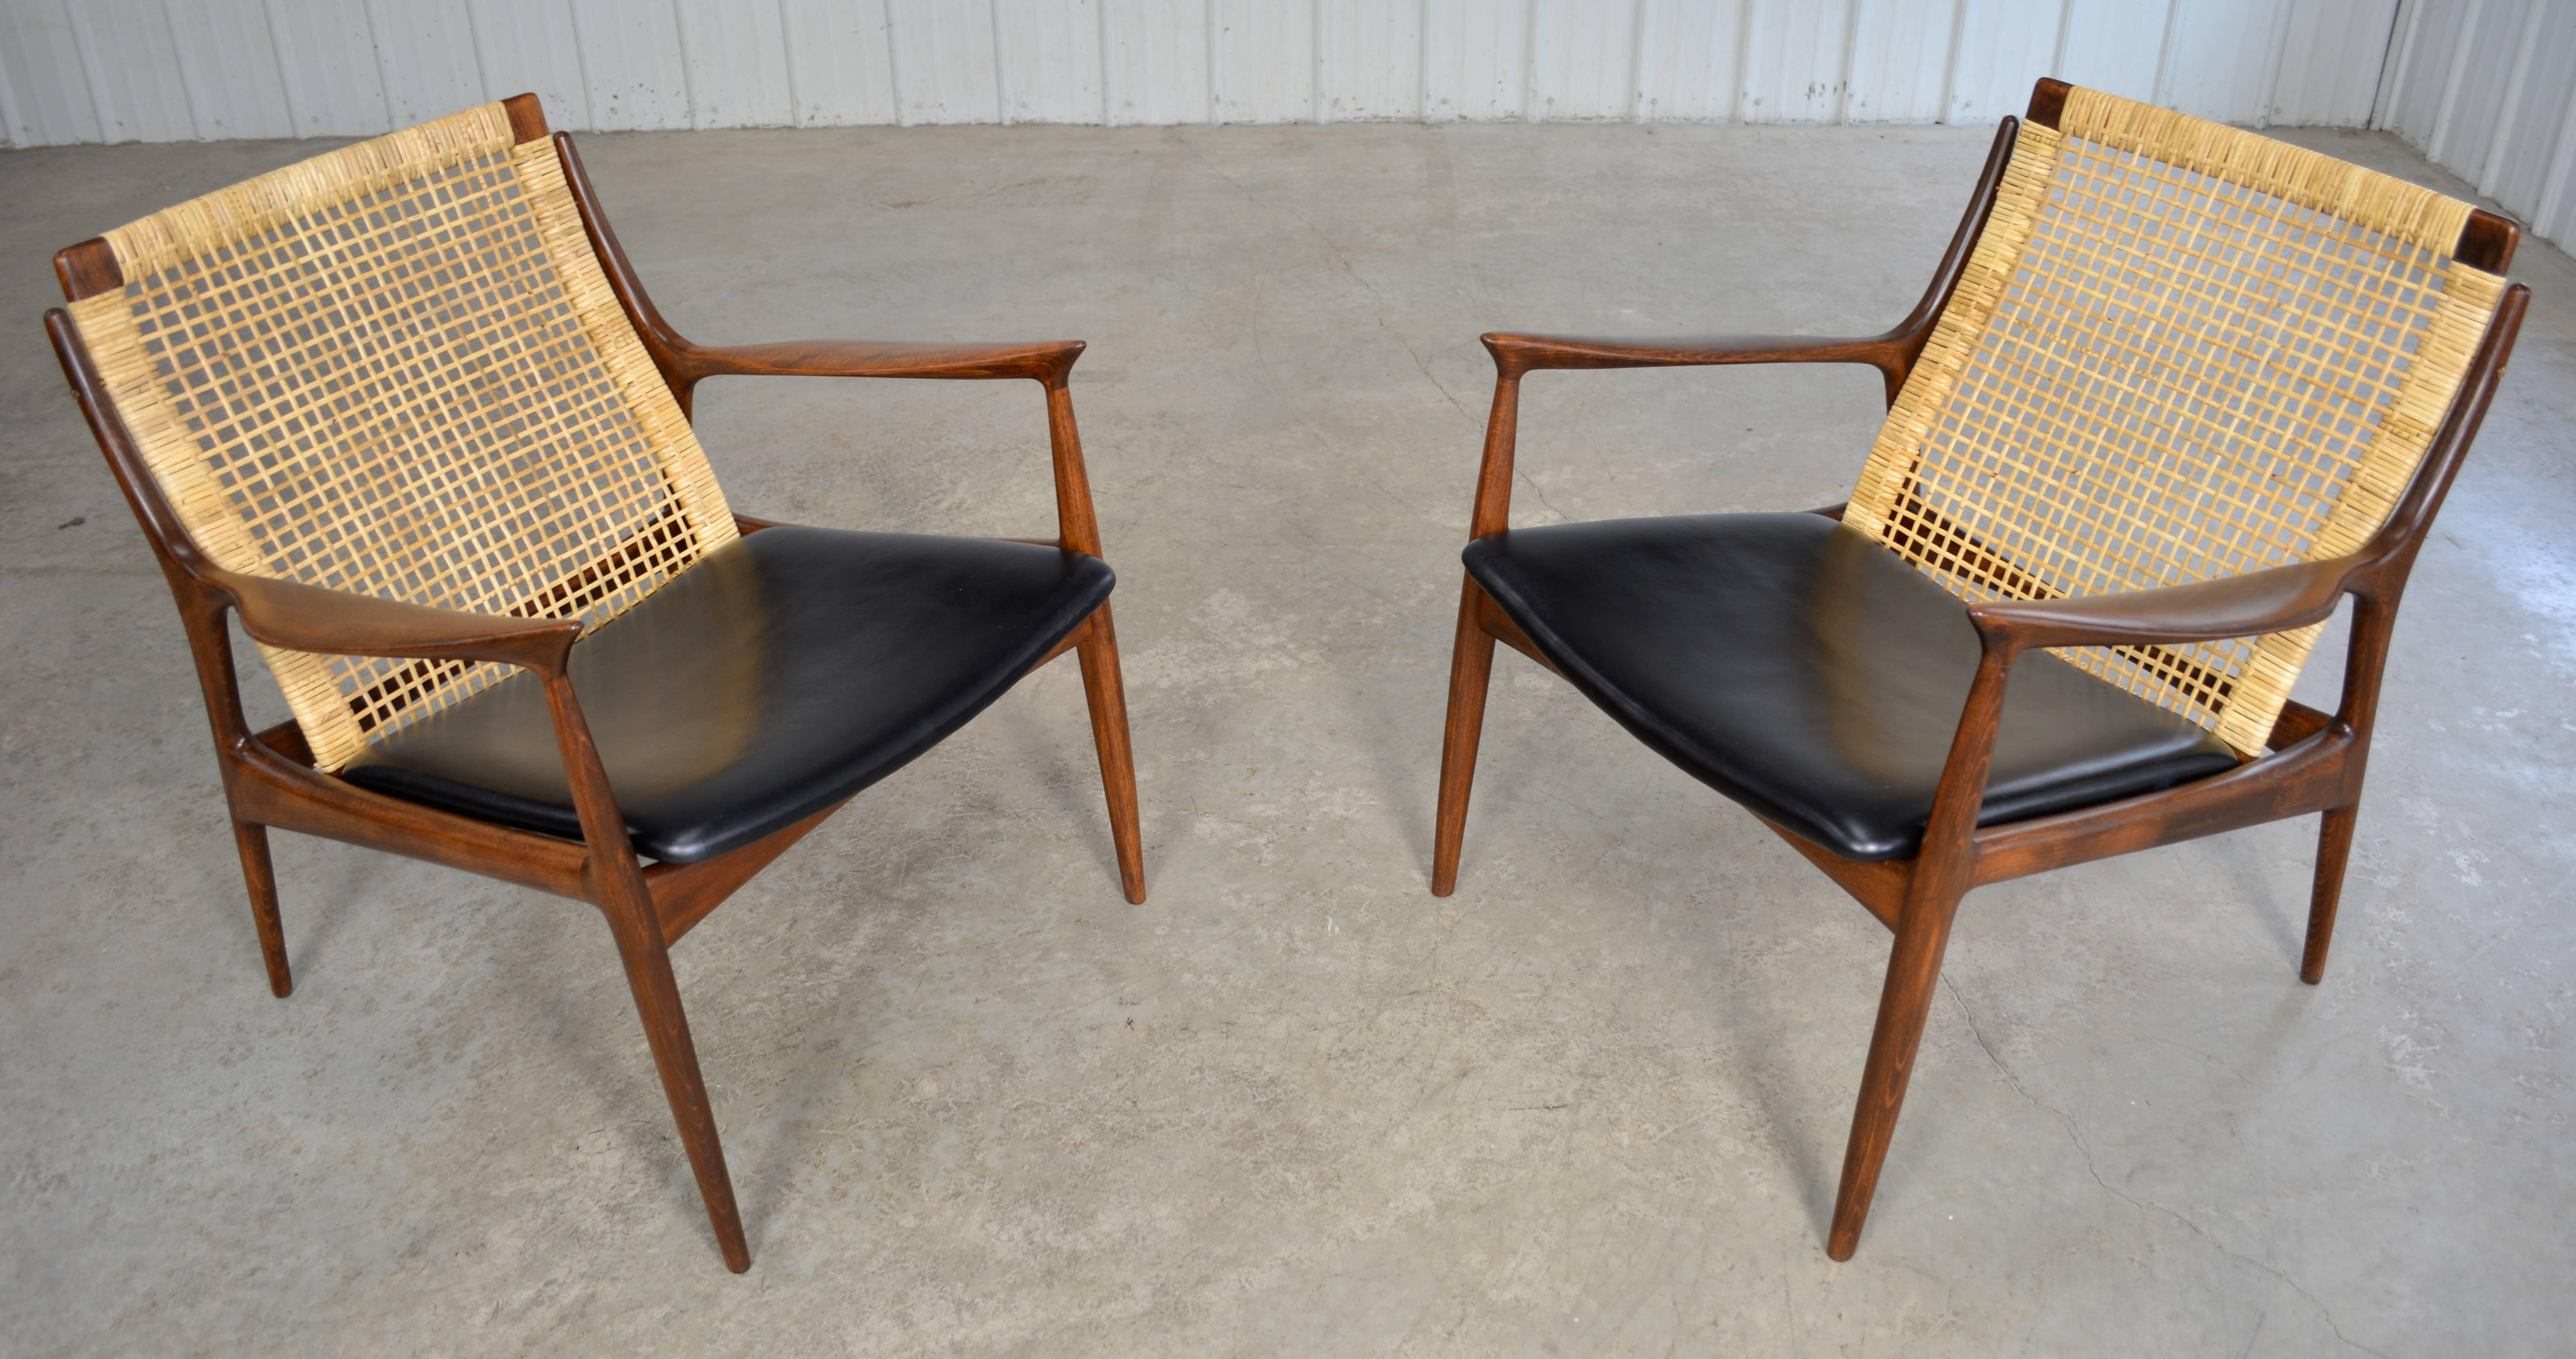 Pair of sculptural walnut lounge chairs with caned backs by Ib Kofod-Larsen. They are newly restored and in perfect condition.